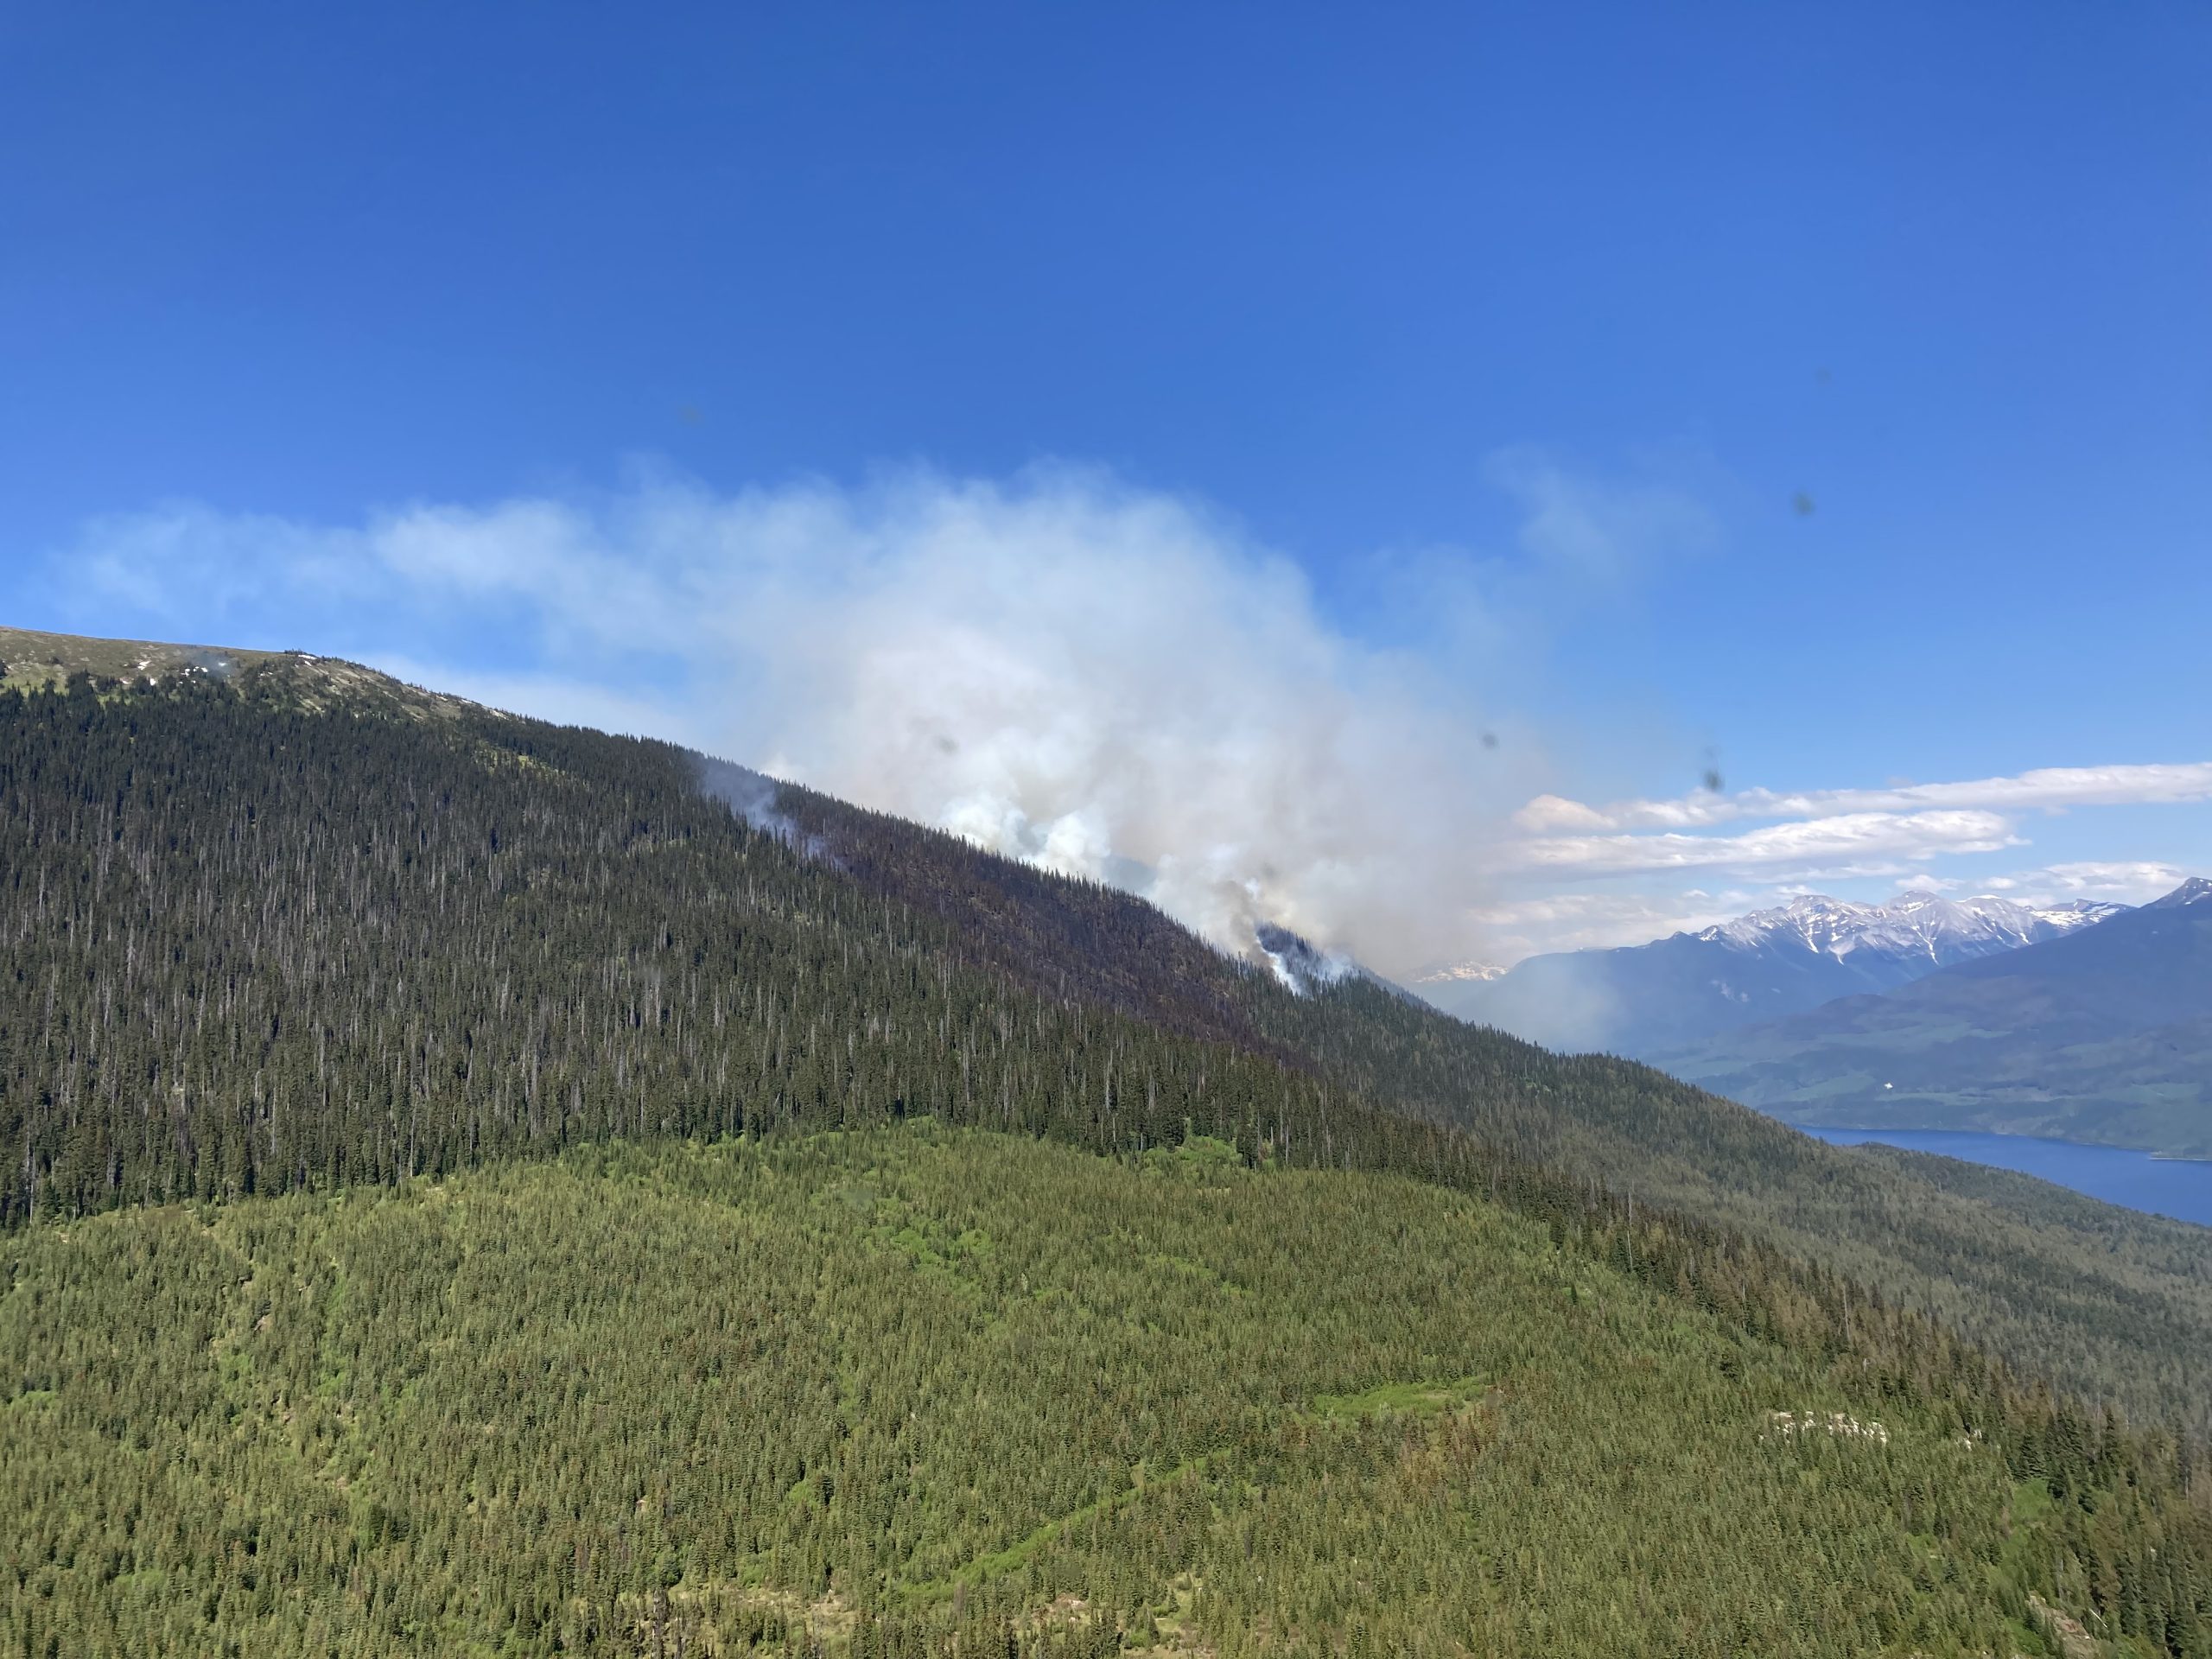 A plume of wildfire smoke is visible against a blue sky and treed hillside.